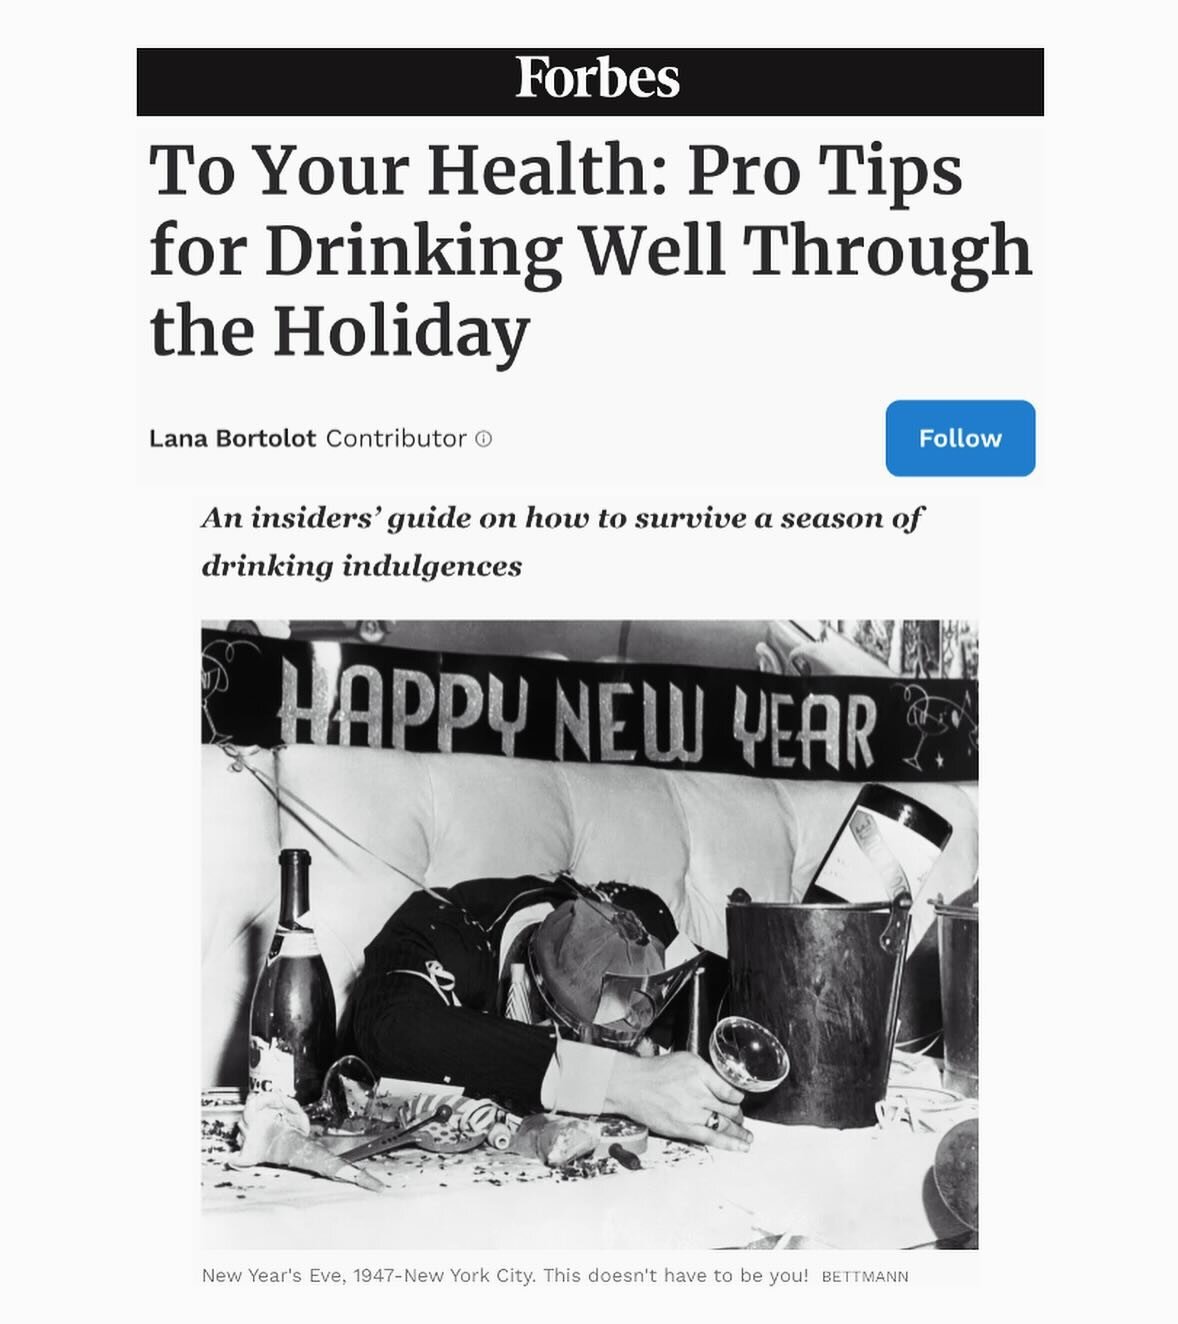 We're proud to be featured alongside ABG community members @amy_c_gross and @smithstorywines in an article published on @forbes focusing on resetting your mind and body, and drinking well this holiday season. 🥂

To navigate this season of indulgence